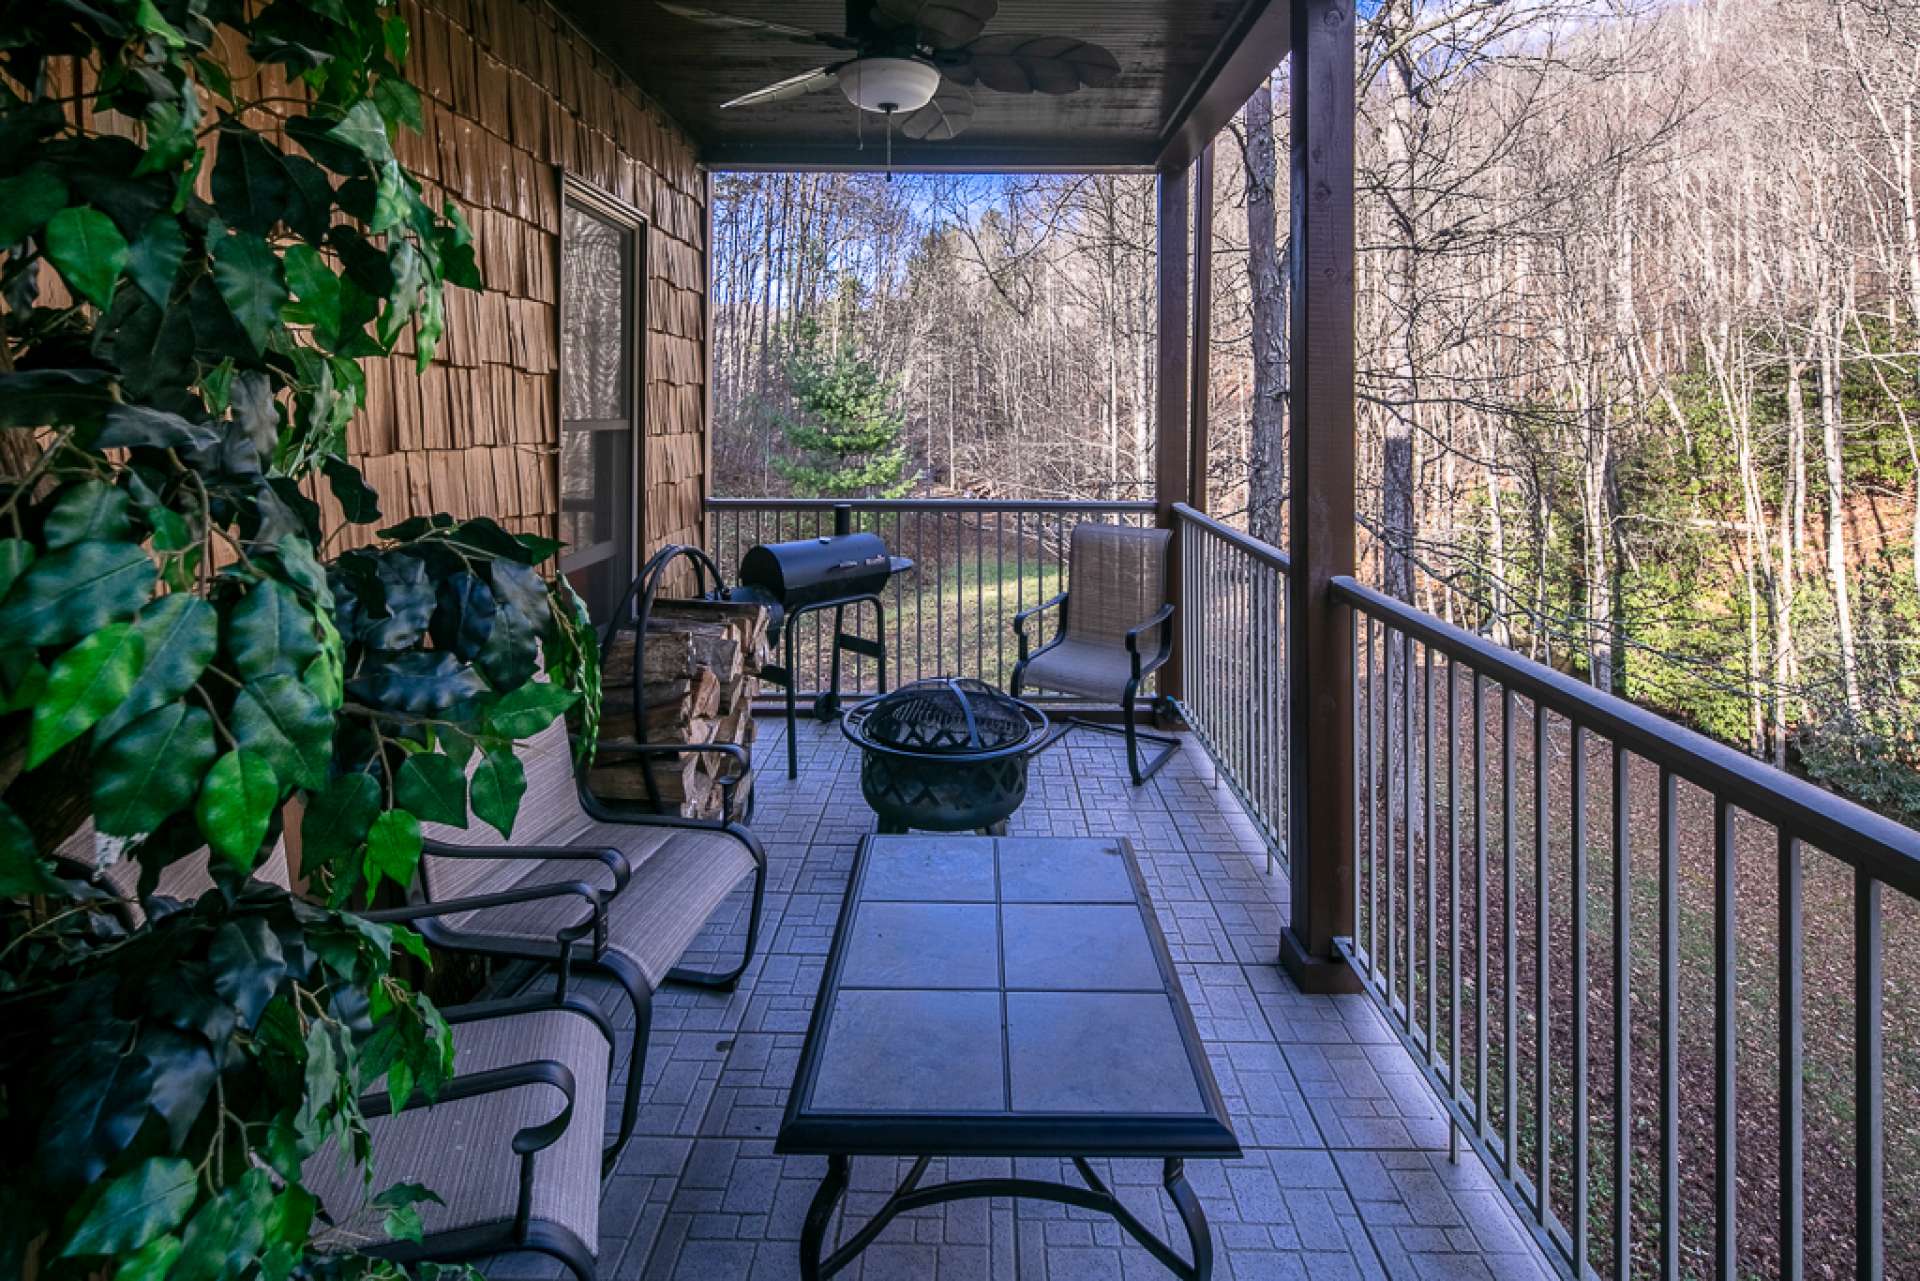 The main level features a full length covered back porch that expands the living space during the warmer months and offers space for outdoor entertaining.